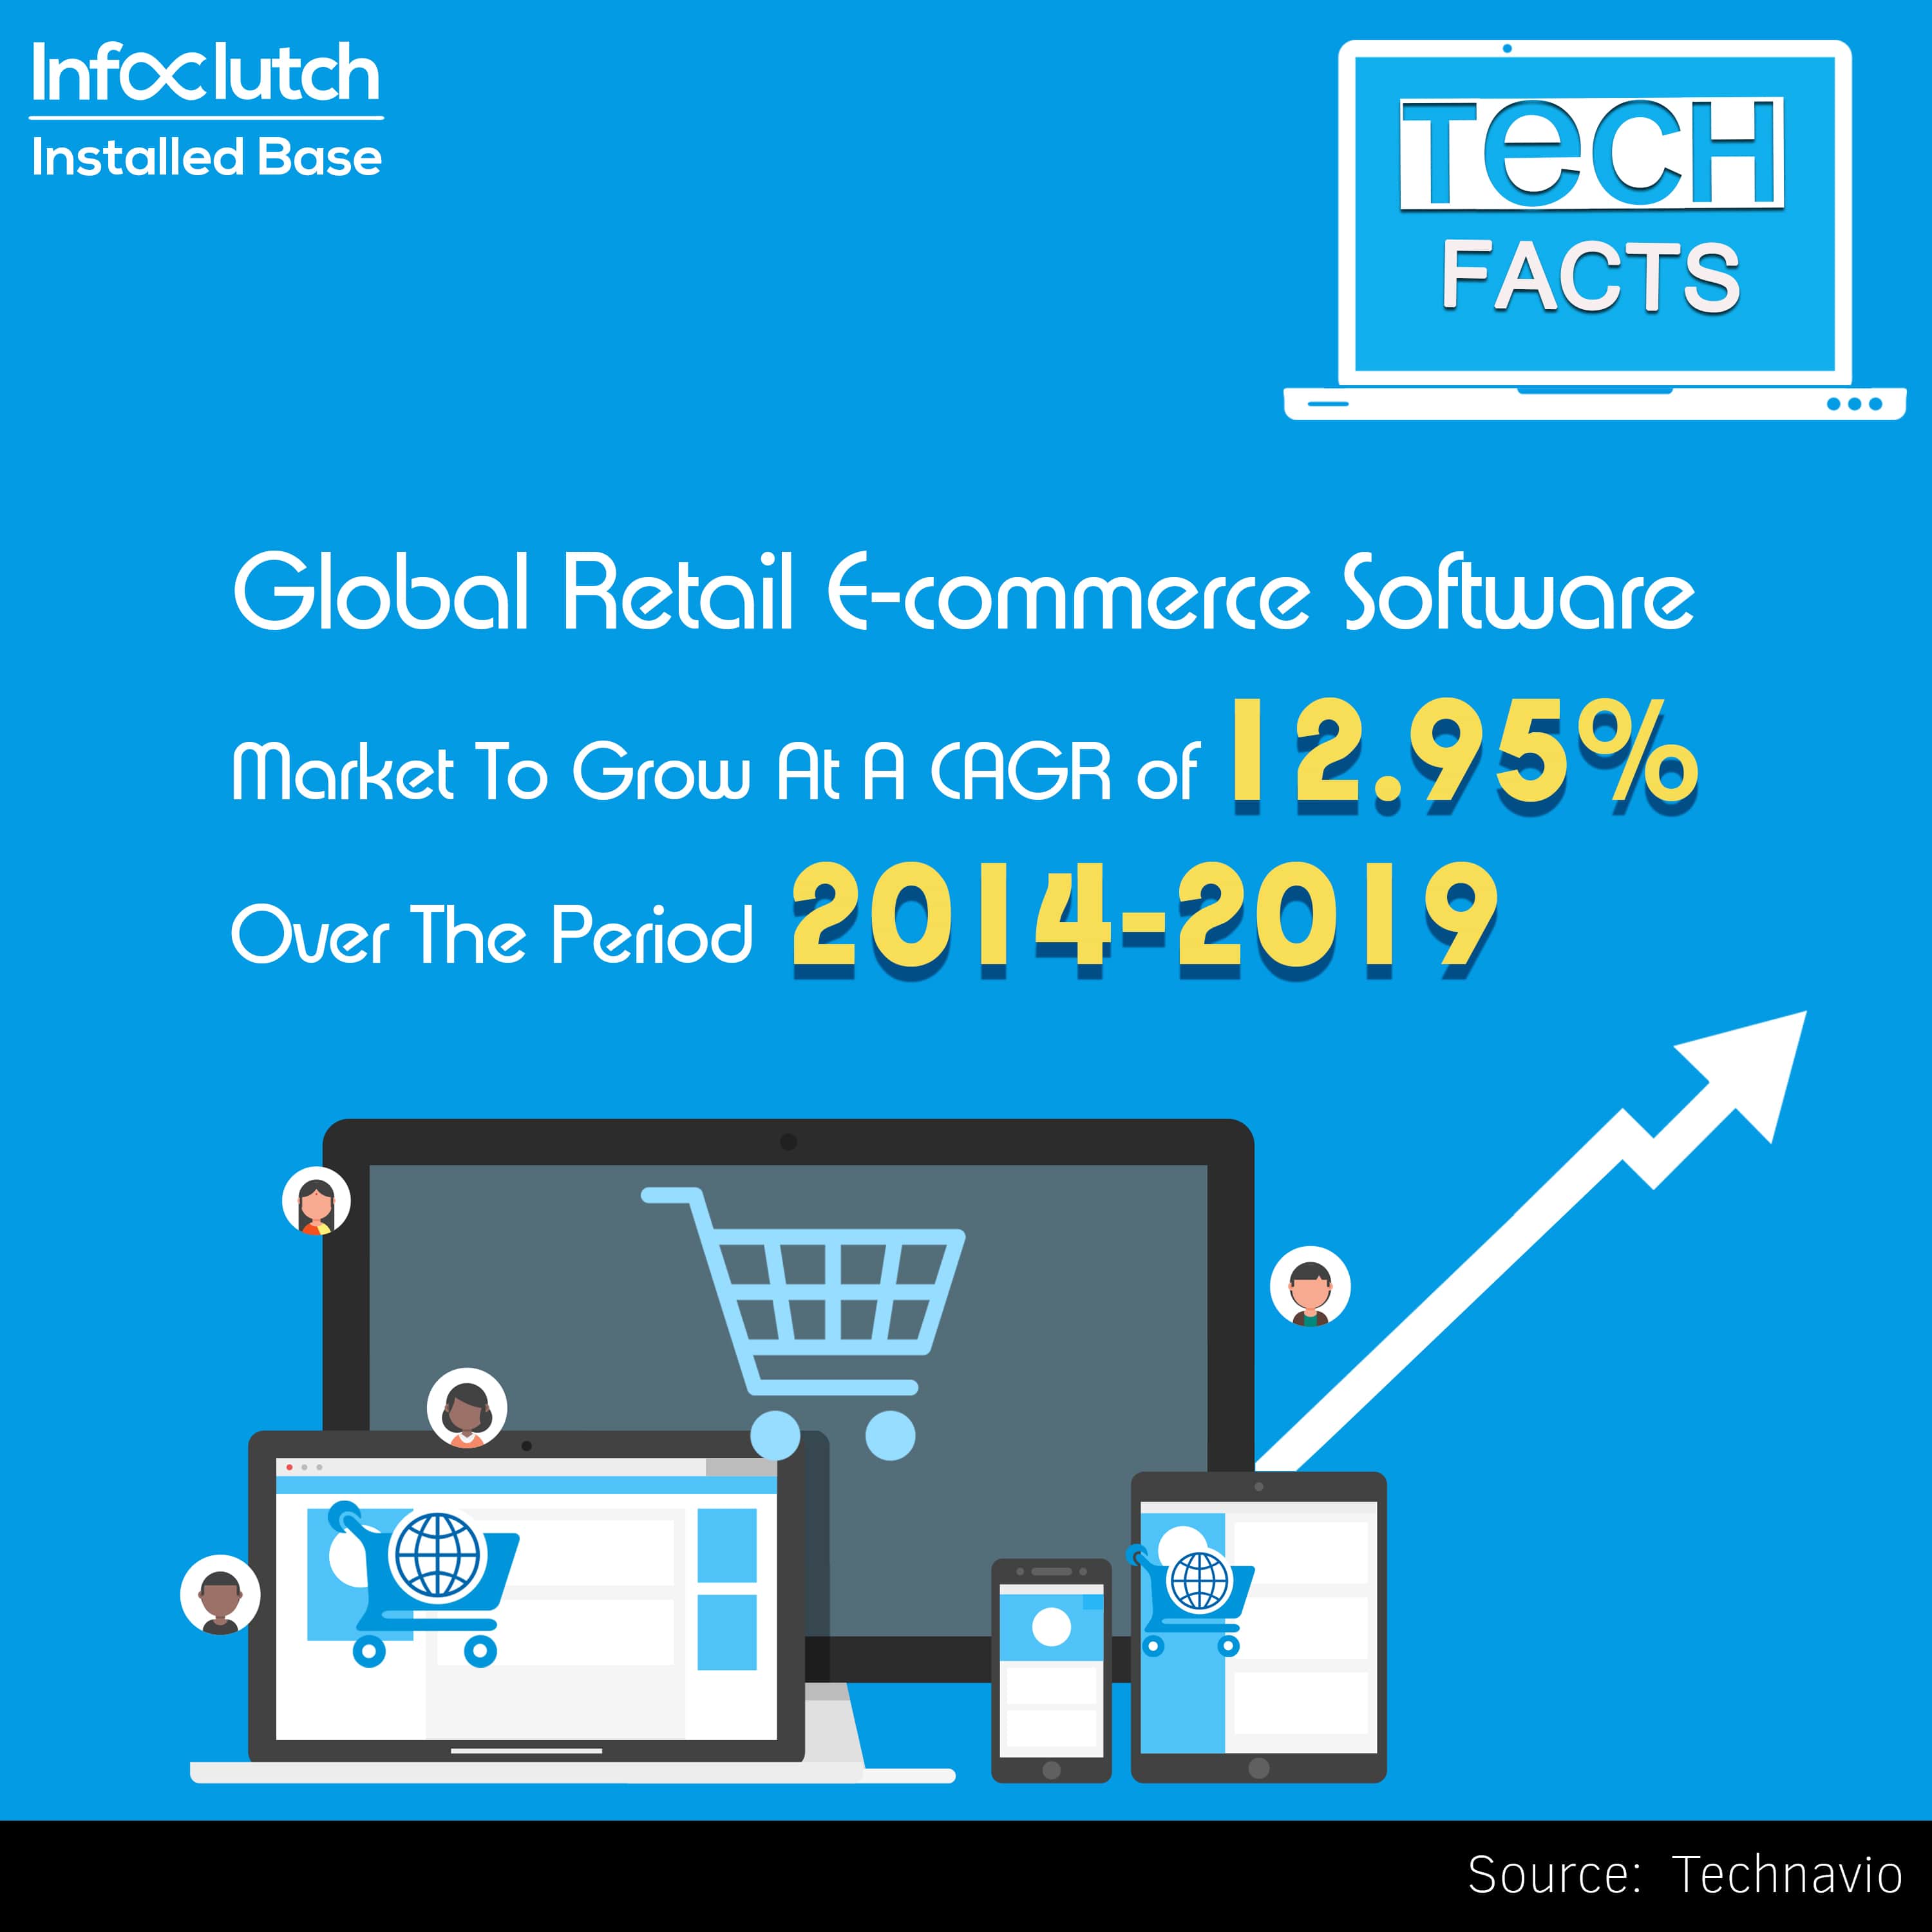 Global retail e-commerce software